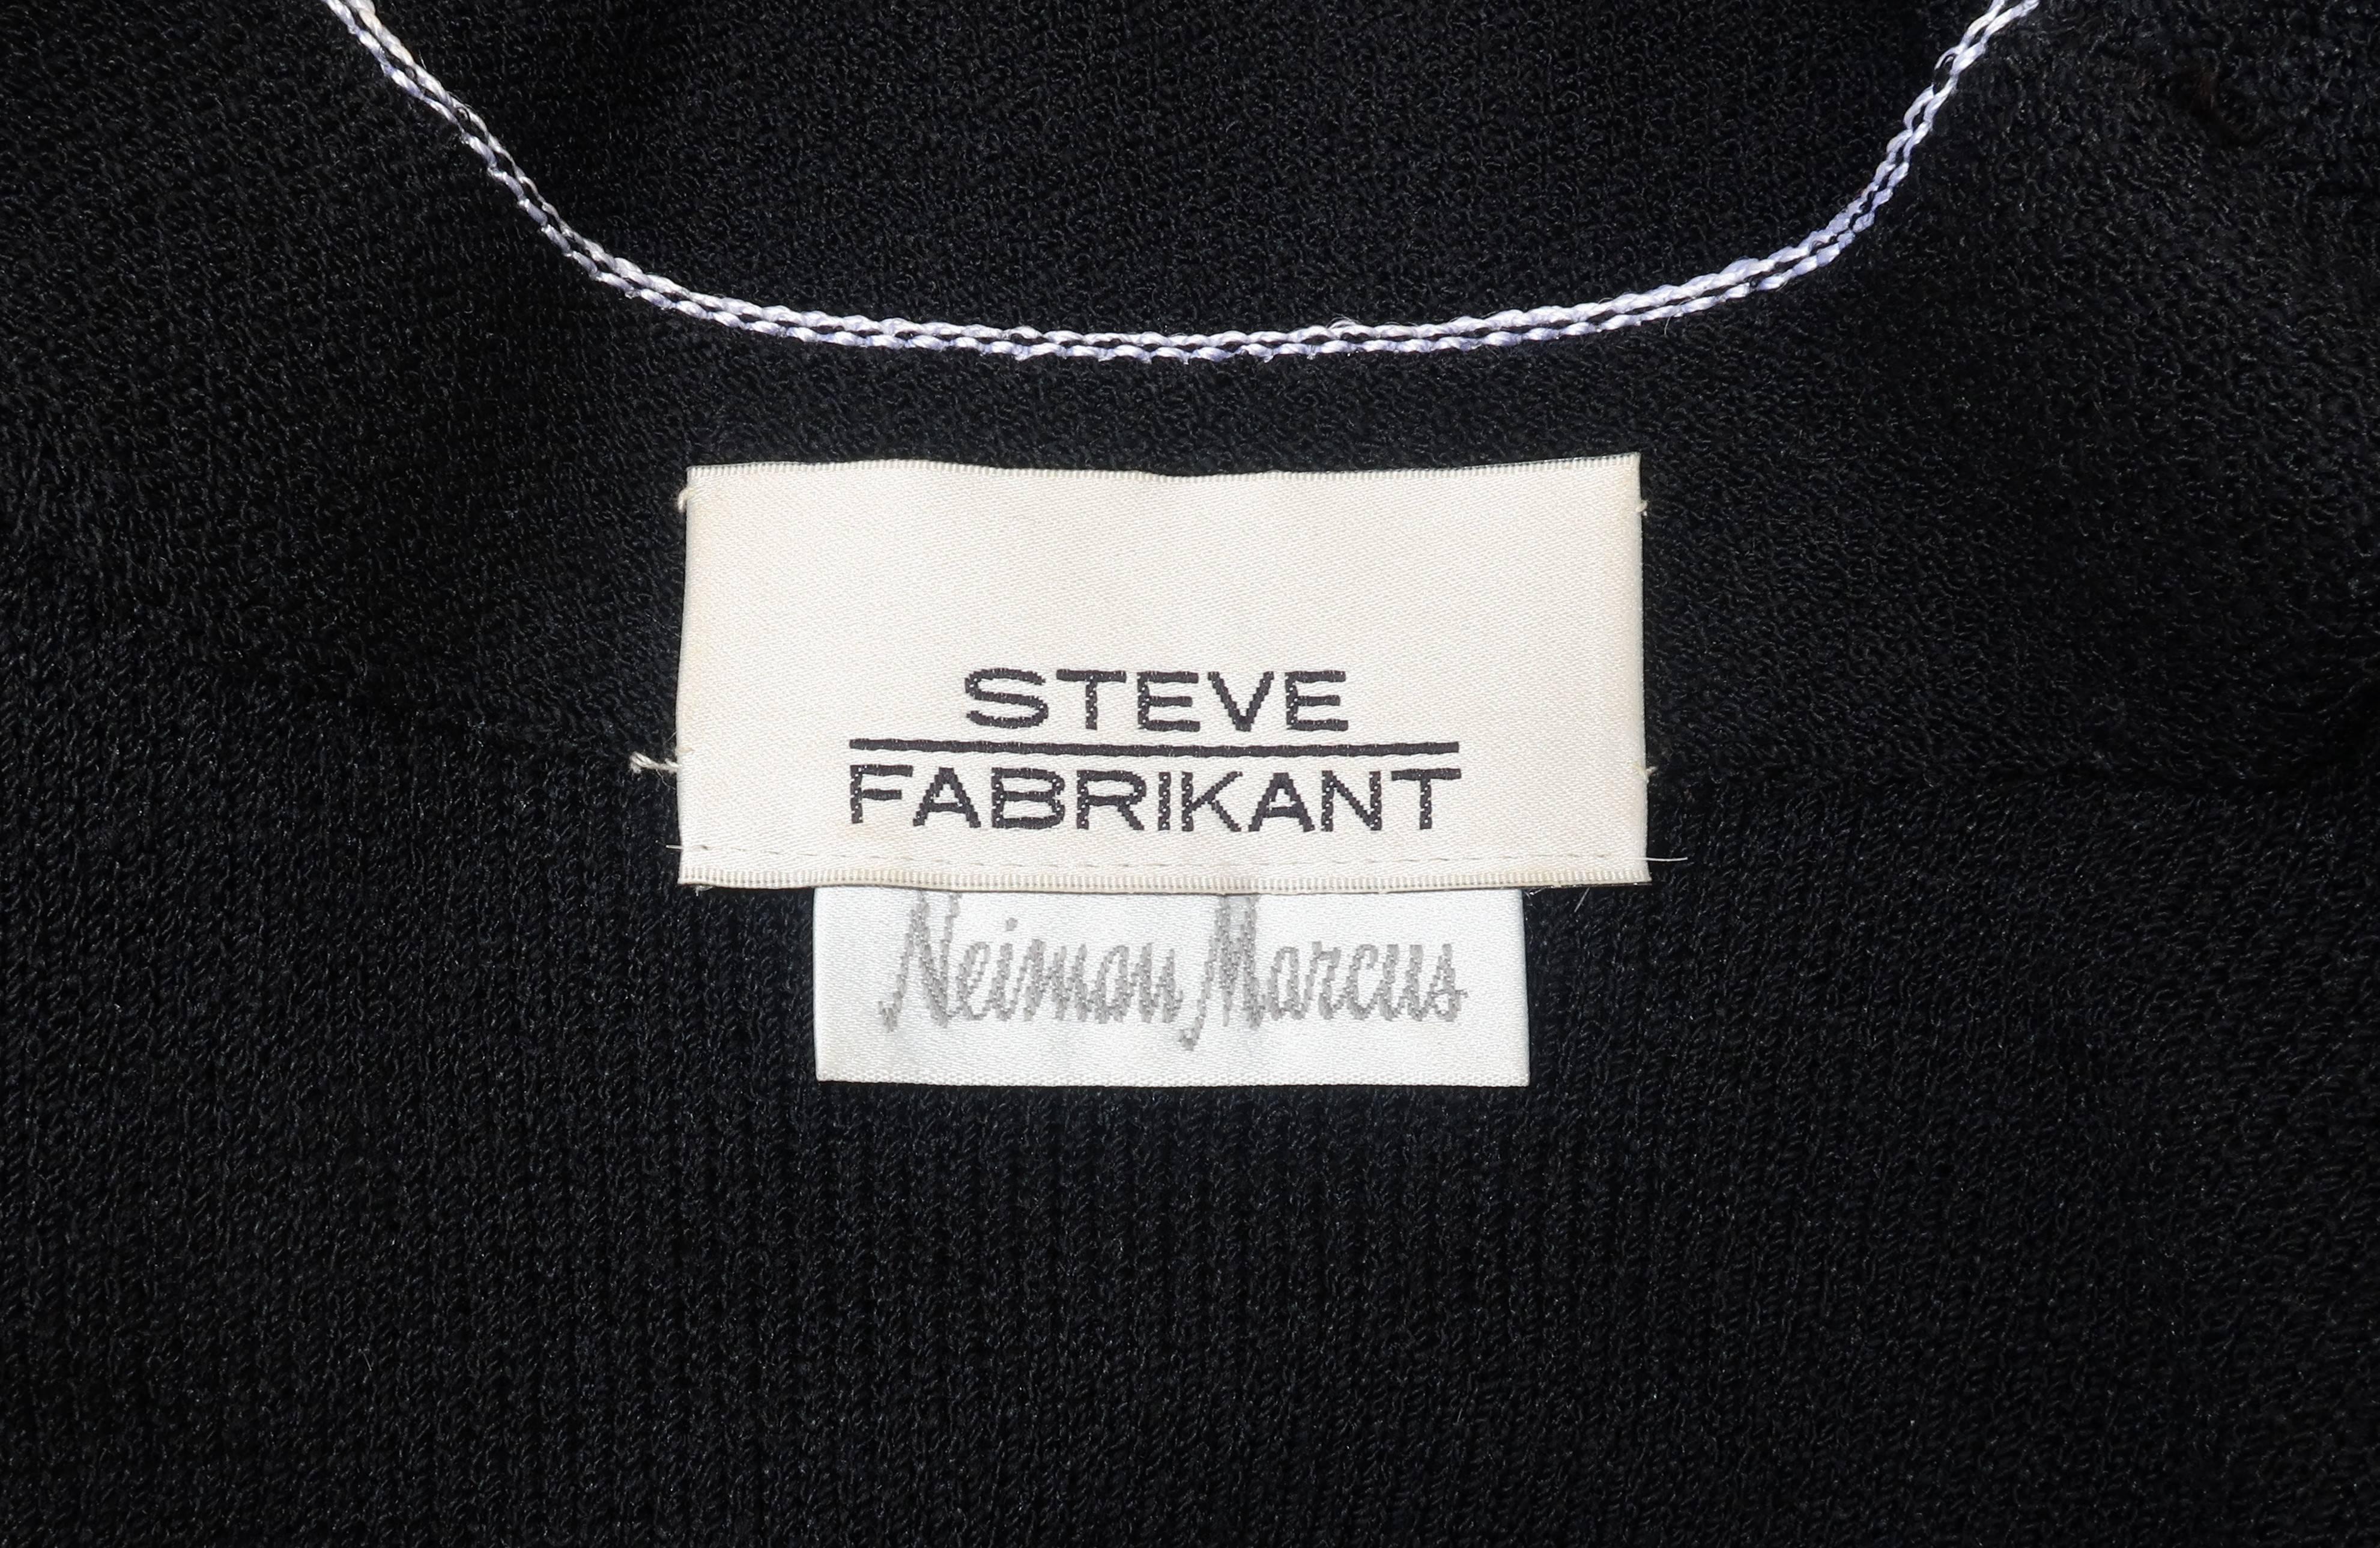 Steve Fabrikant Black and White Knit Trapeze Dress With Musical Notes ...